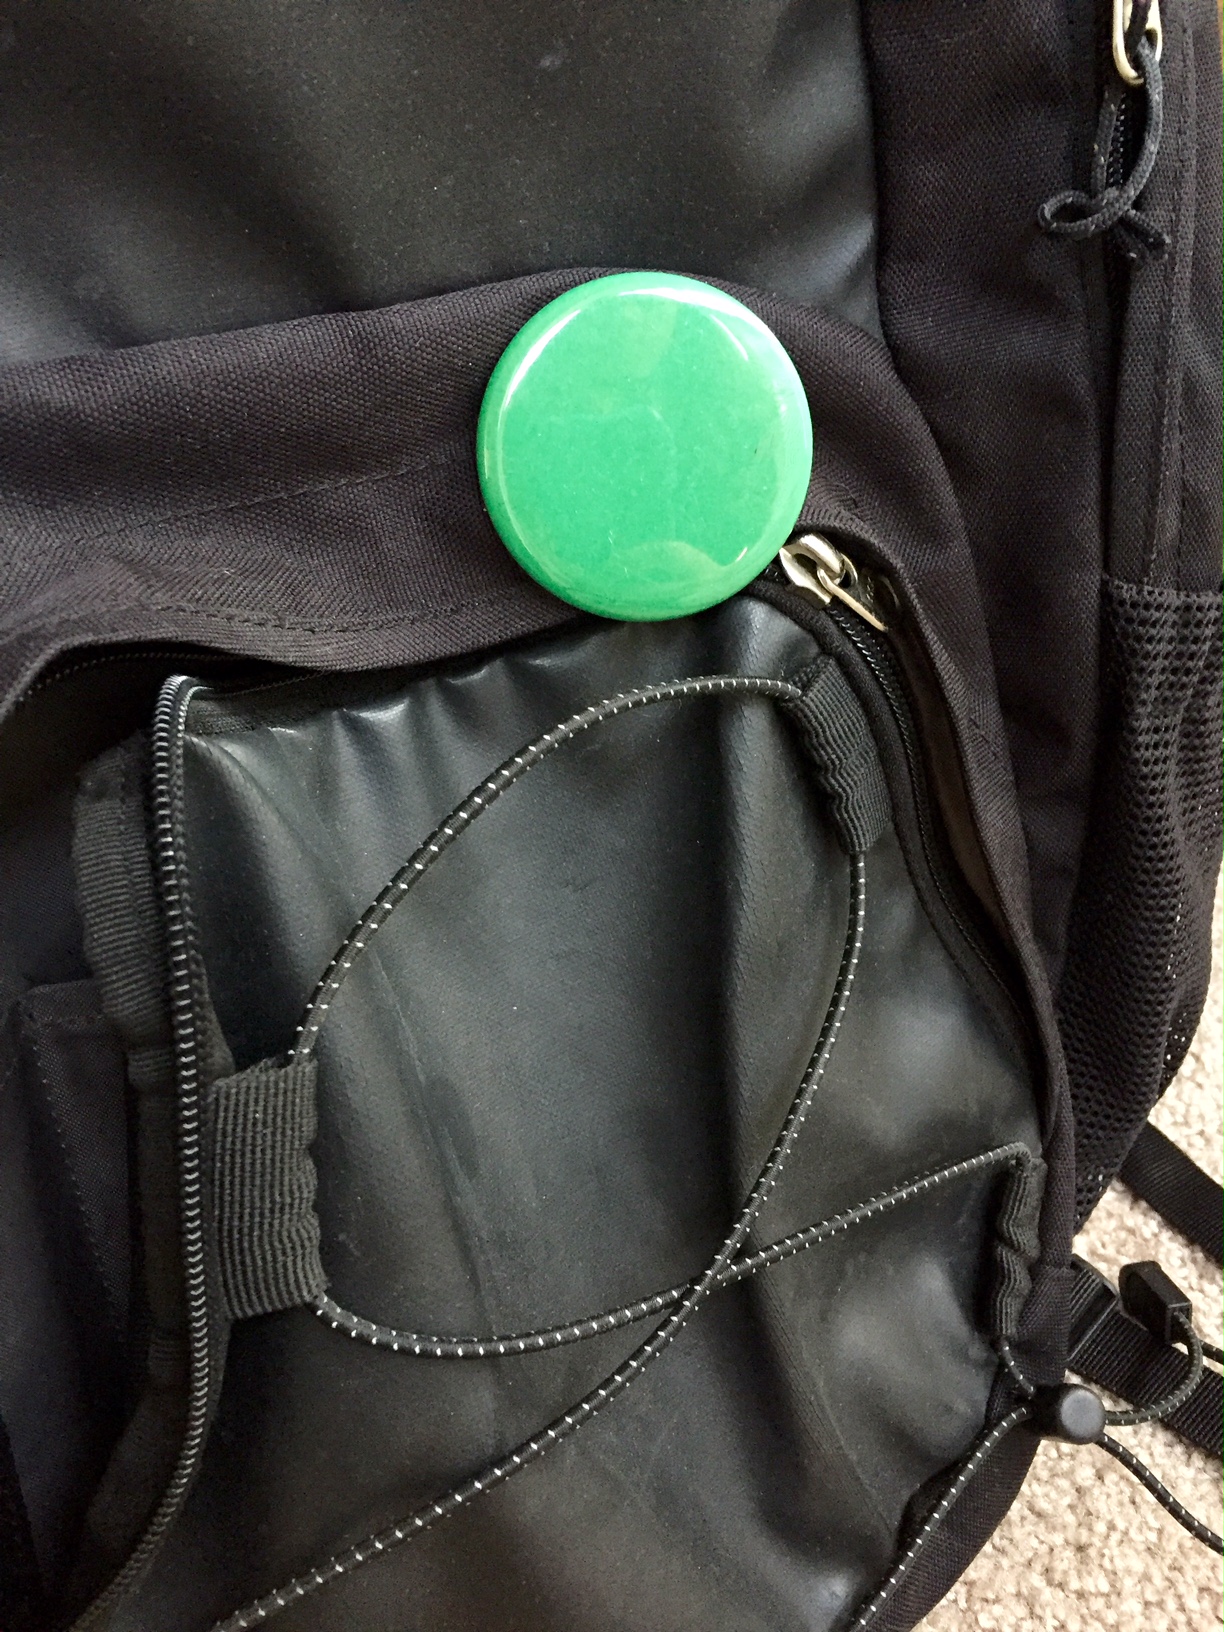 I still carry my green dot with me on my backpack.